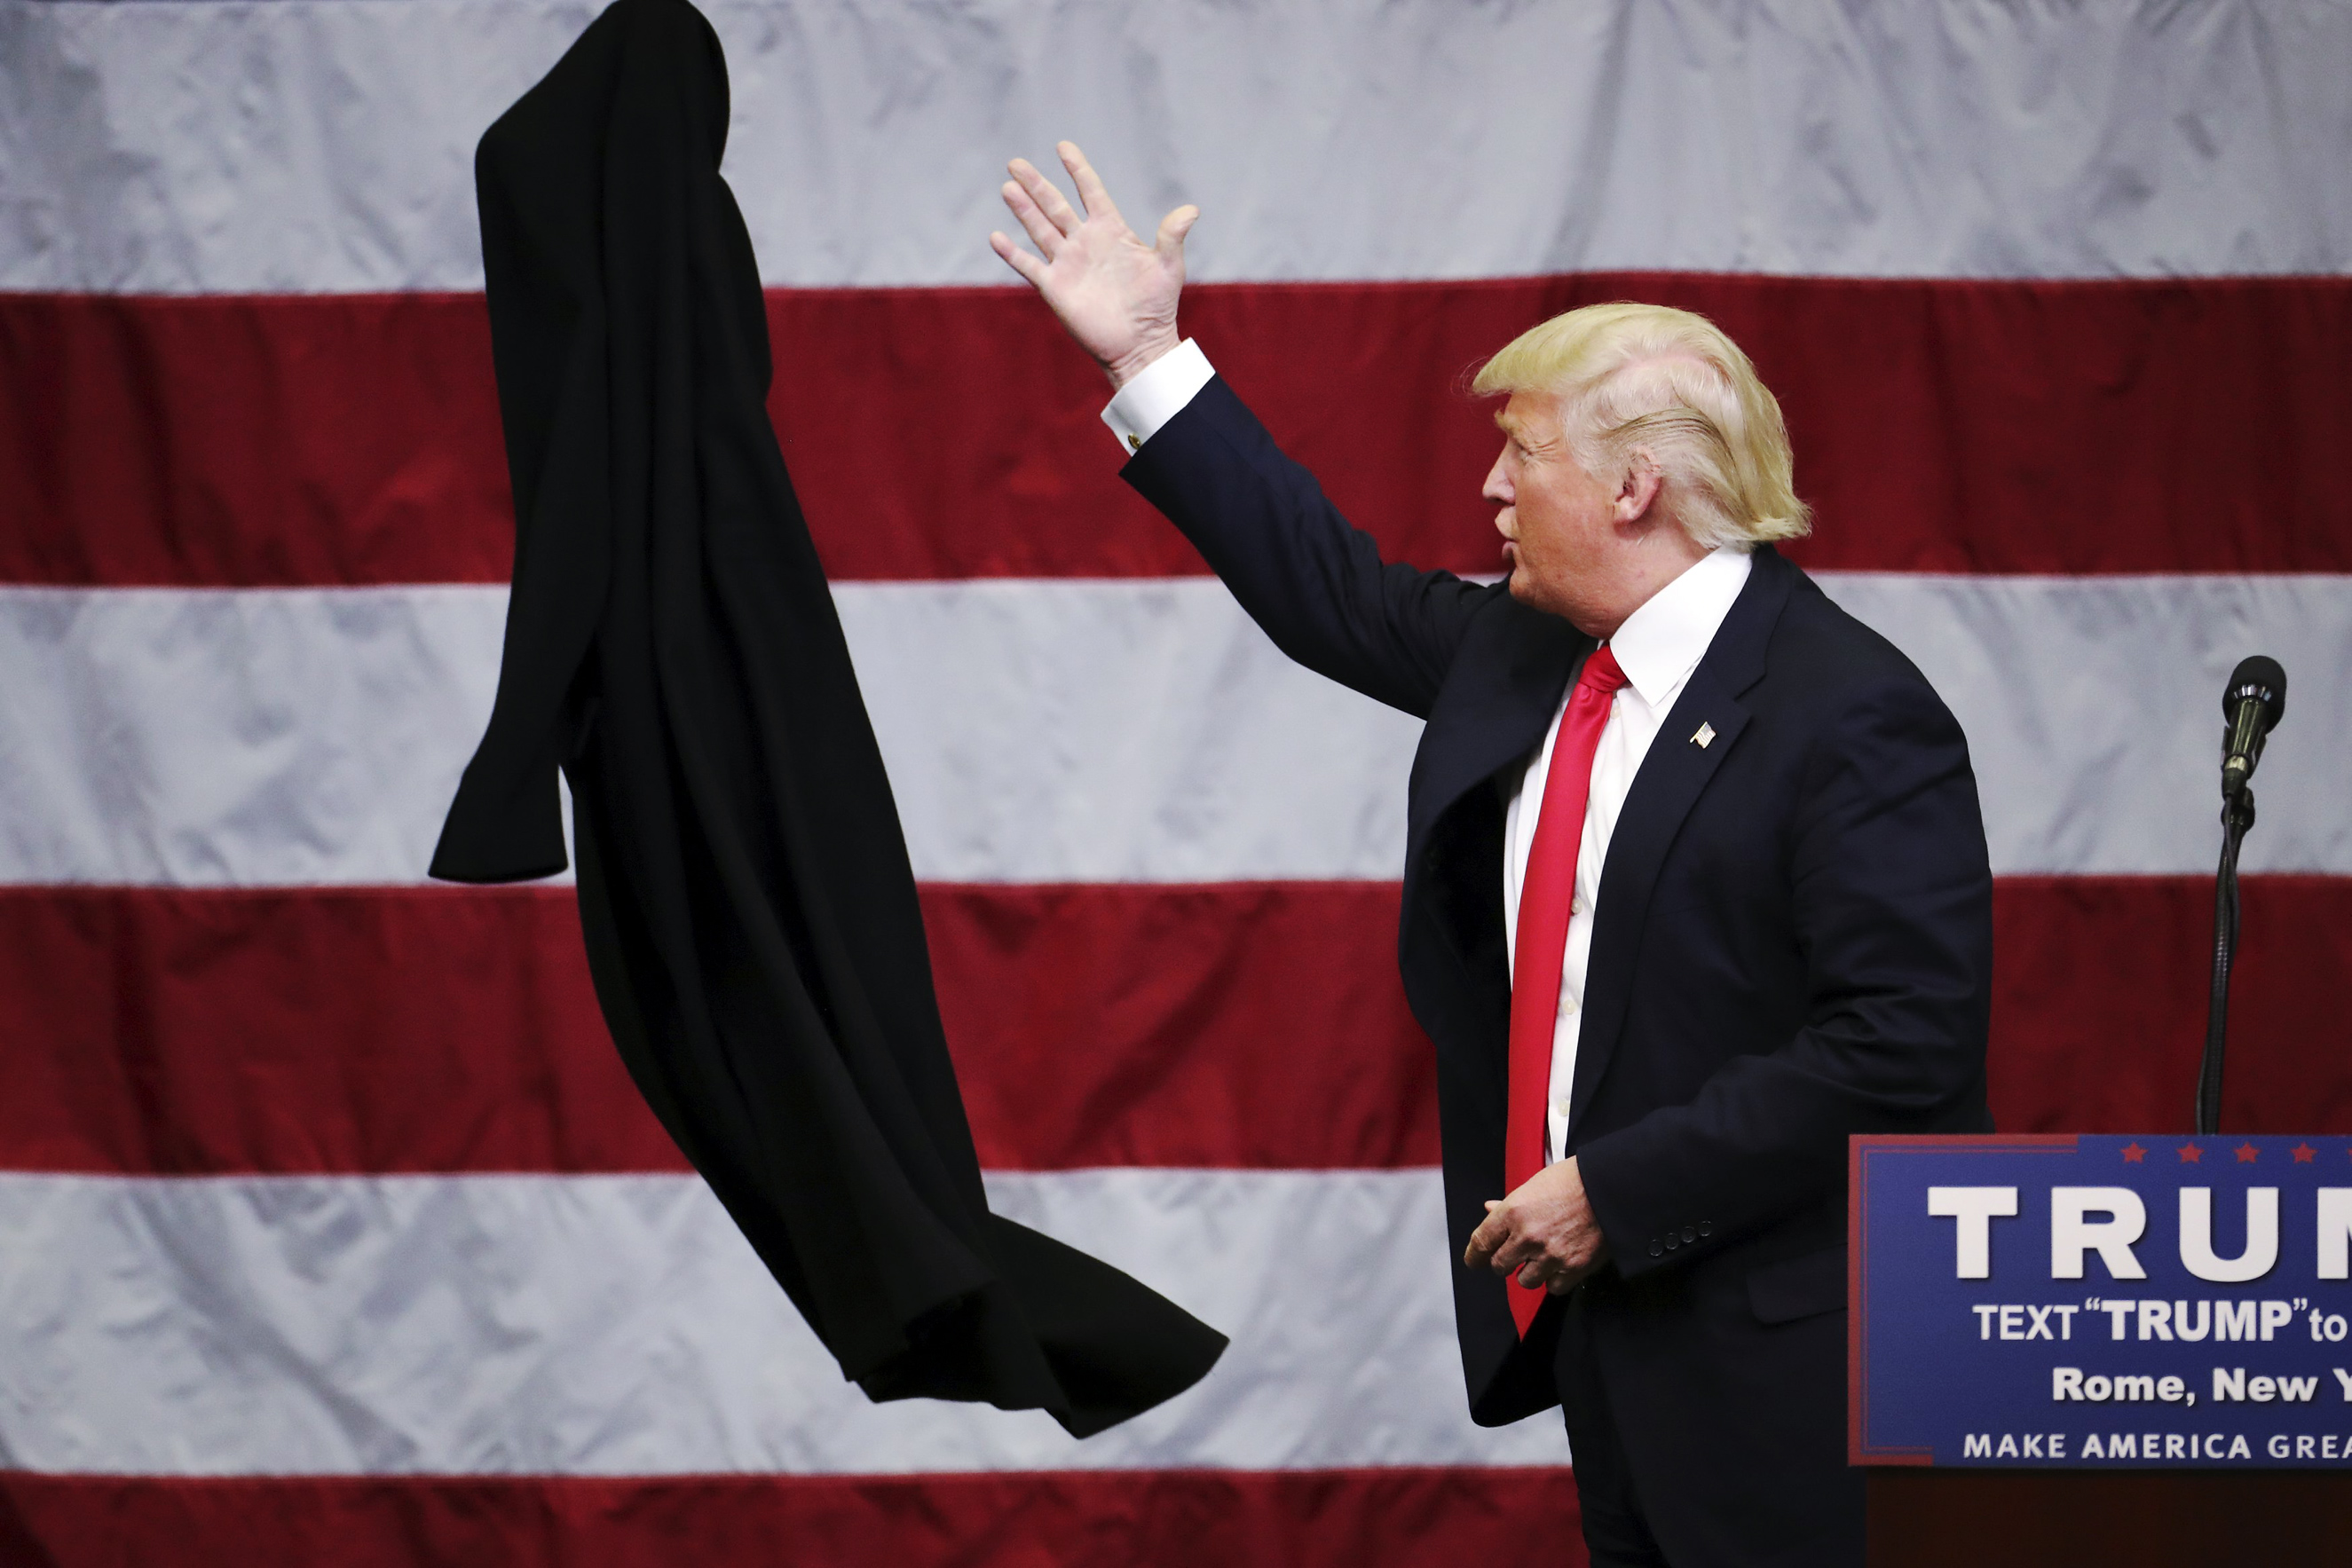 Republican presidential candidate Donald Trump tosses off his overcoat during a campaign event in Rome, N.Y. on April 12, 2016.